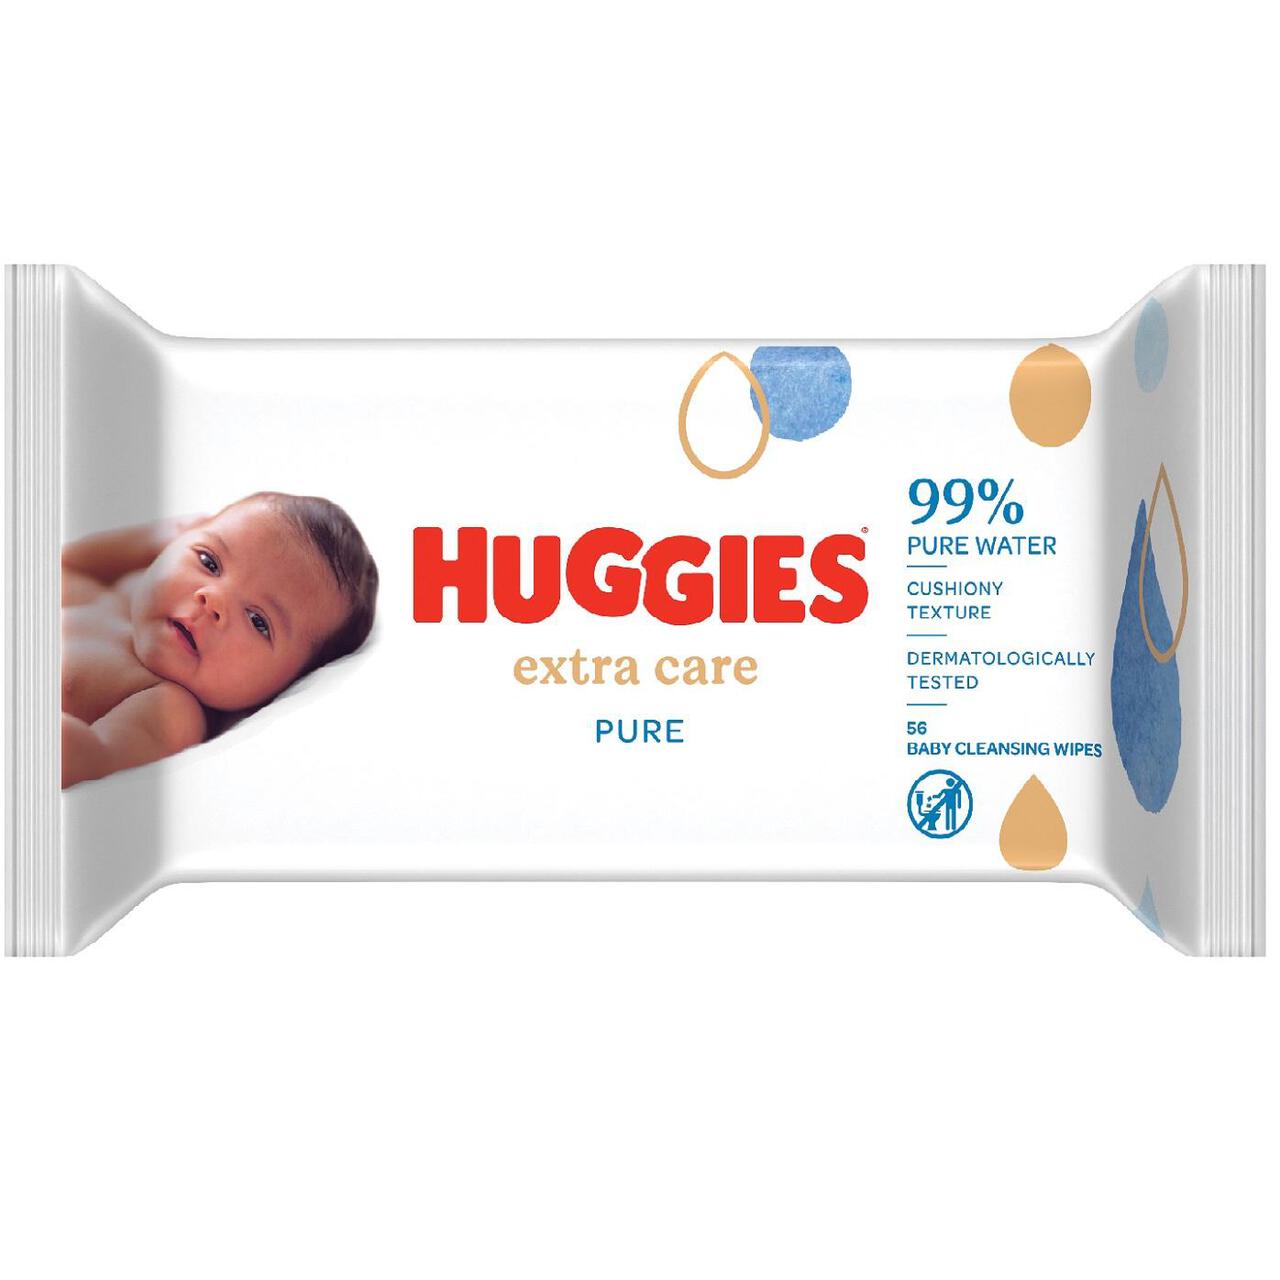 Huggies Pure Extra Care 99% Water Baby Wipes 56 per pack